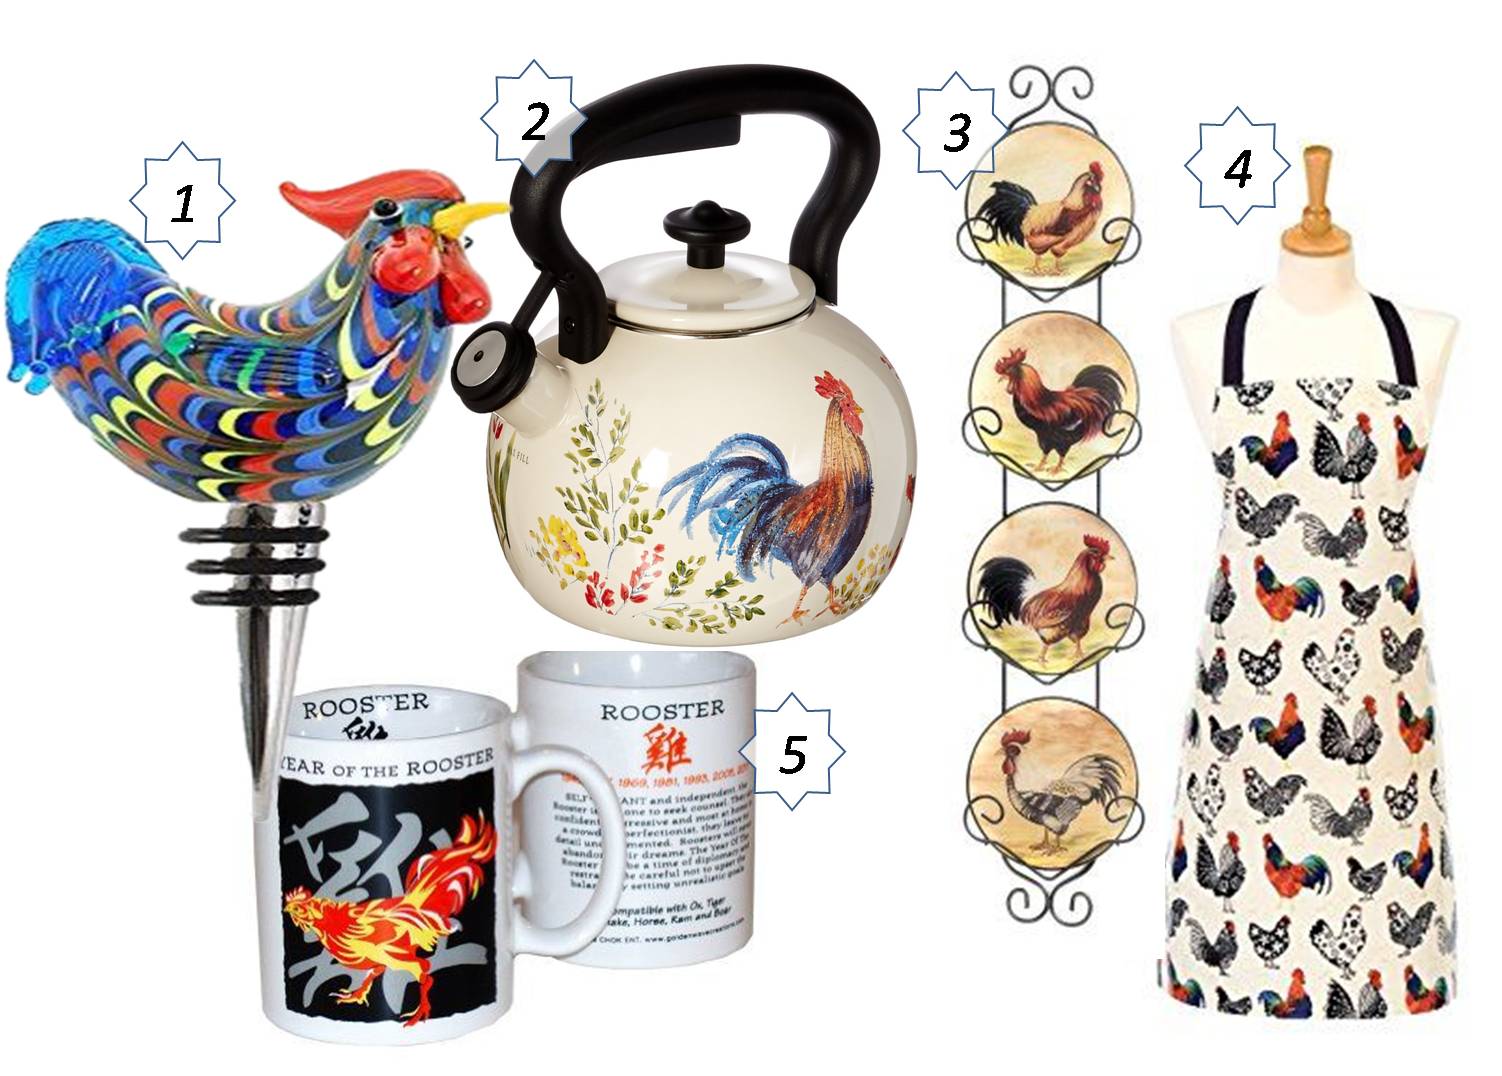 Year Of The Rooster Kitchen Knicknacks 